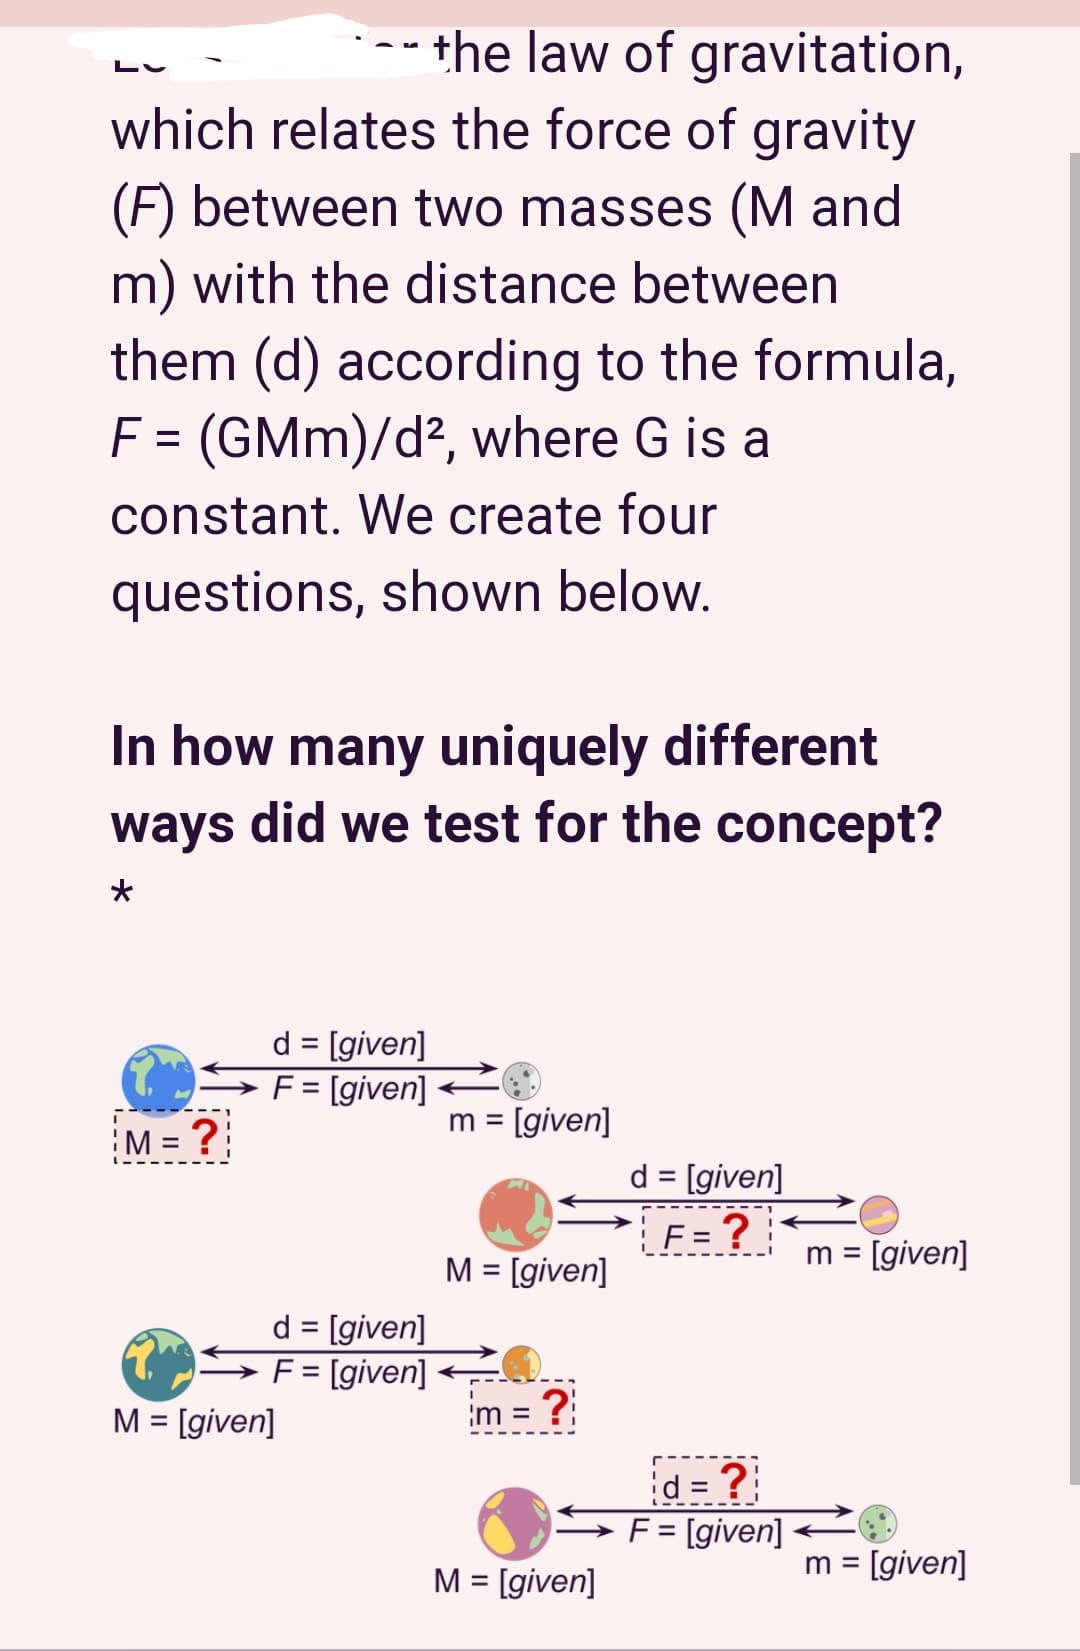 the law of gravitation,
which relates the force of gravity
(F) between two masses (M and
m) with the distance between
them (d) according to the formula,
F = (GMm)/d², where G is a
constant. We create four
questions, shown below.
In how many uniquely different
ways did we test for the concept?
★
d = [given]
F = [given]
m = [given]
M = ?
d = [given]
F = ? ₁
M = [given]
m = [given]
d = [given]
F = [given]
M = [given]
m =
?
M = [given]
m = [given]
I
d = ?
F = [given]